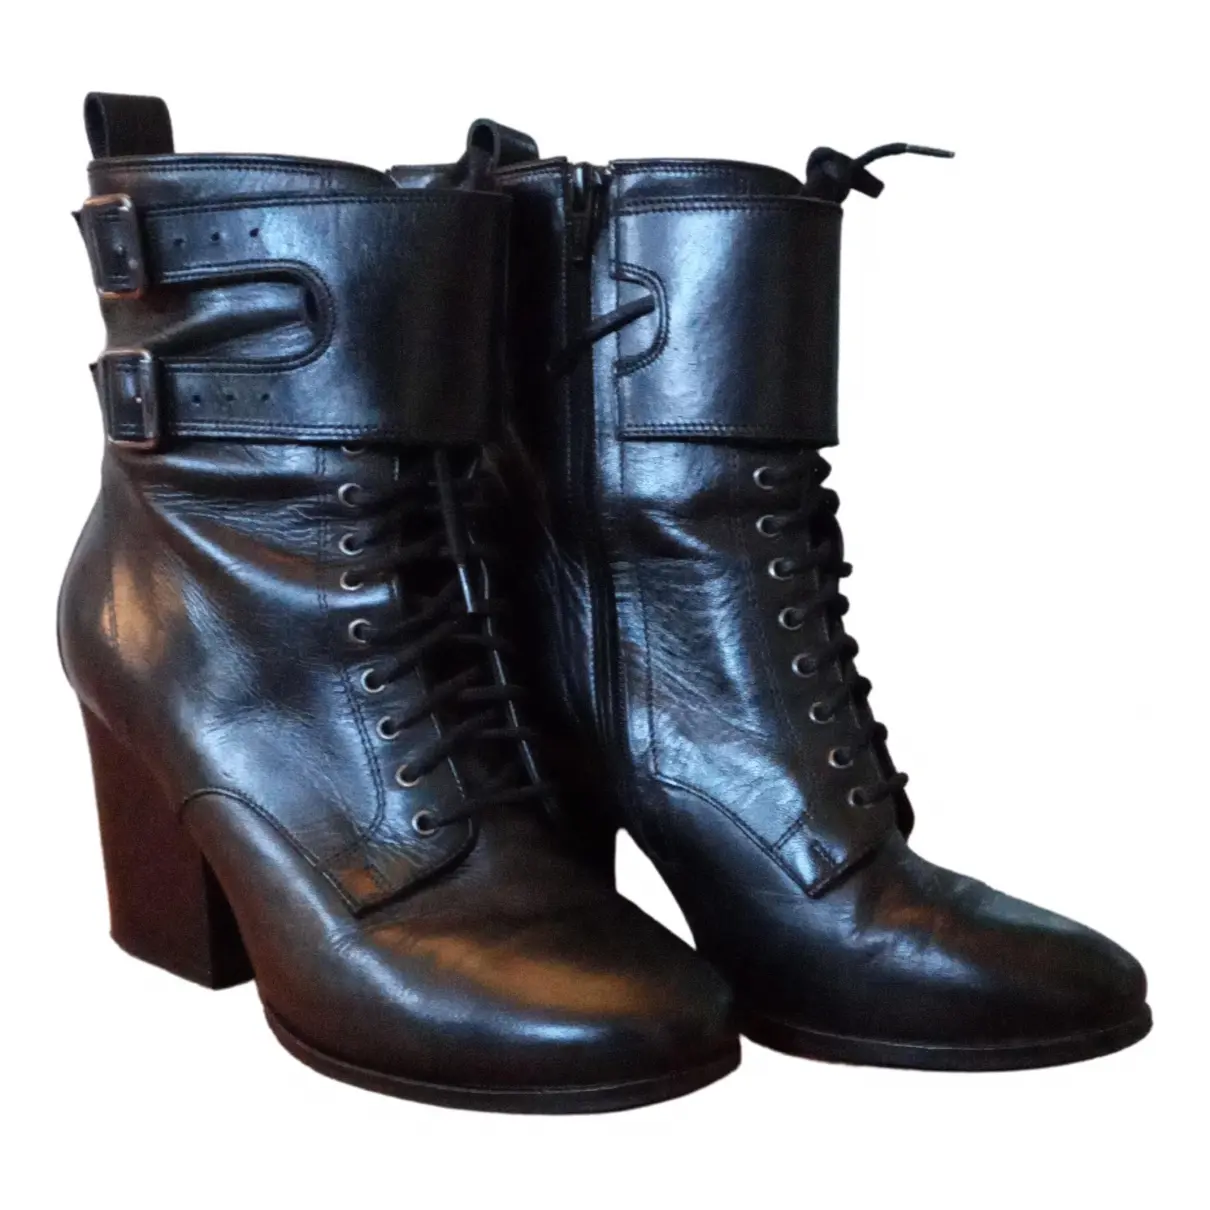 Leather lace up boots The Kooples